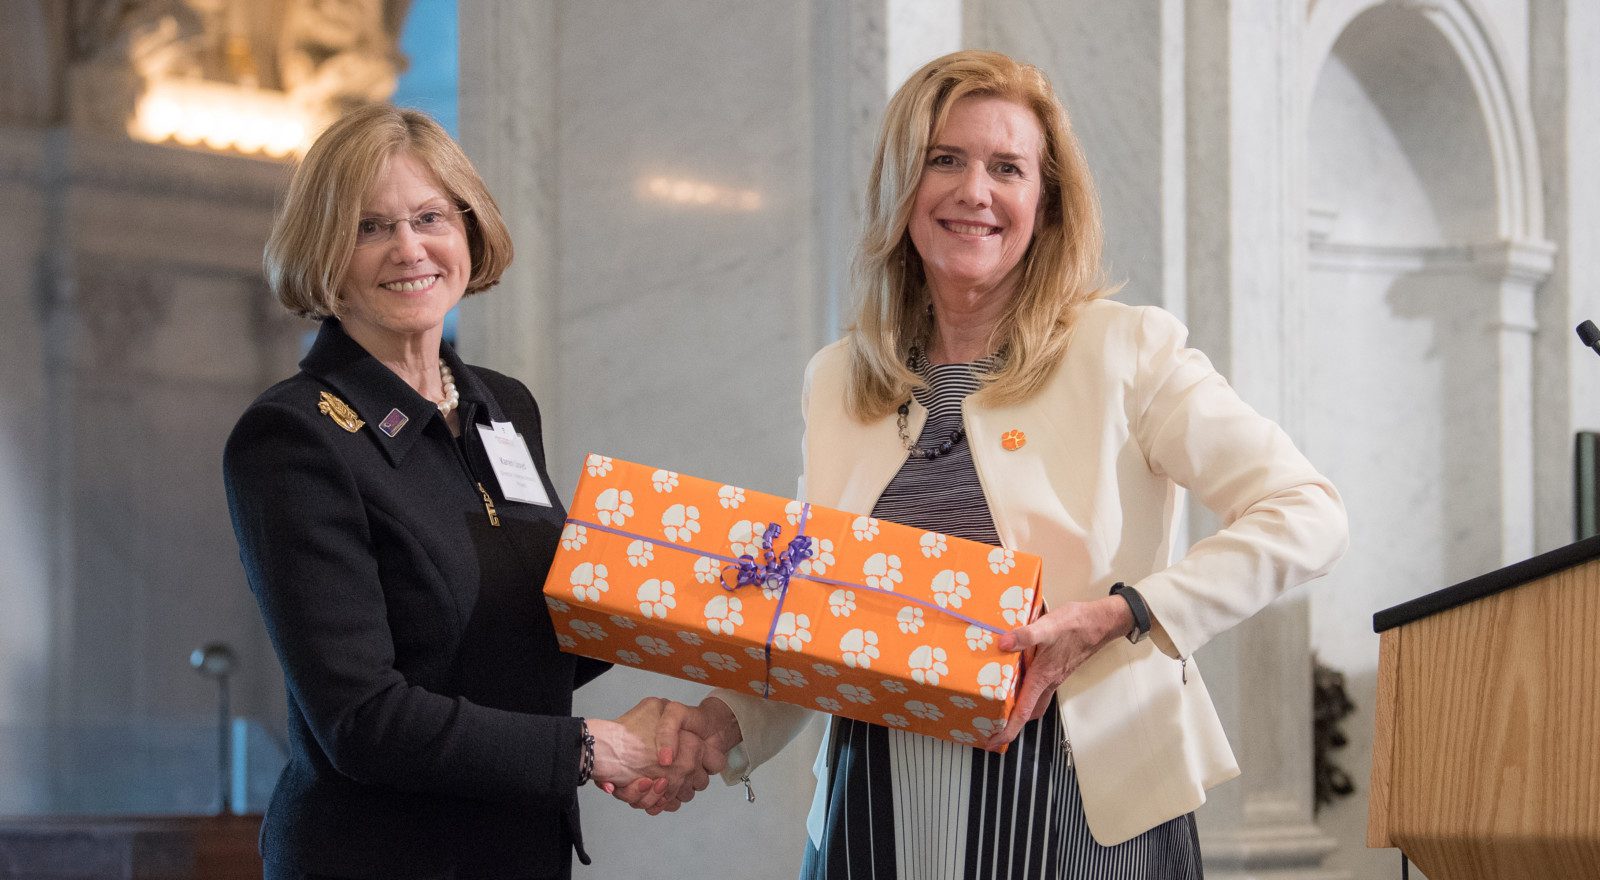 Dean Wendy York presents symbolic package of videos at Library of Congress